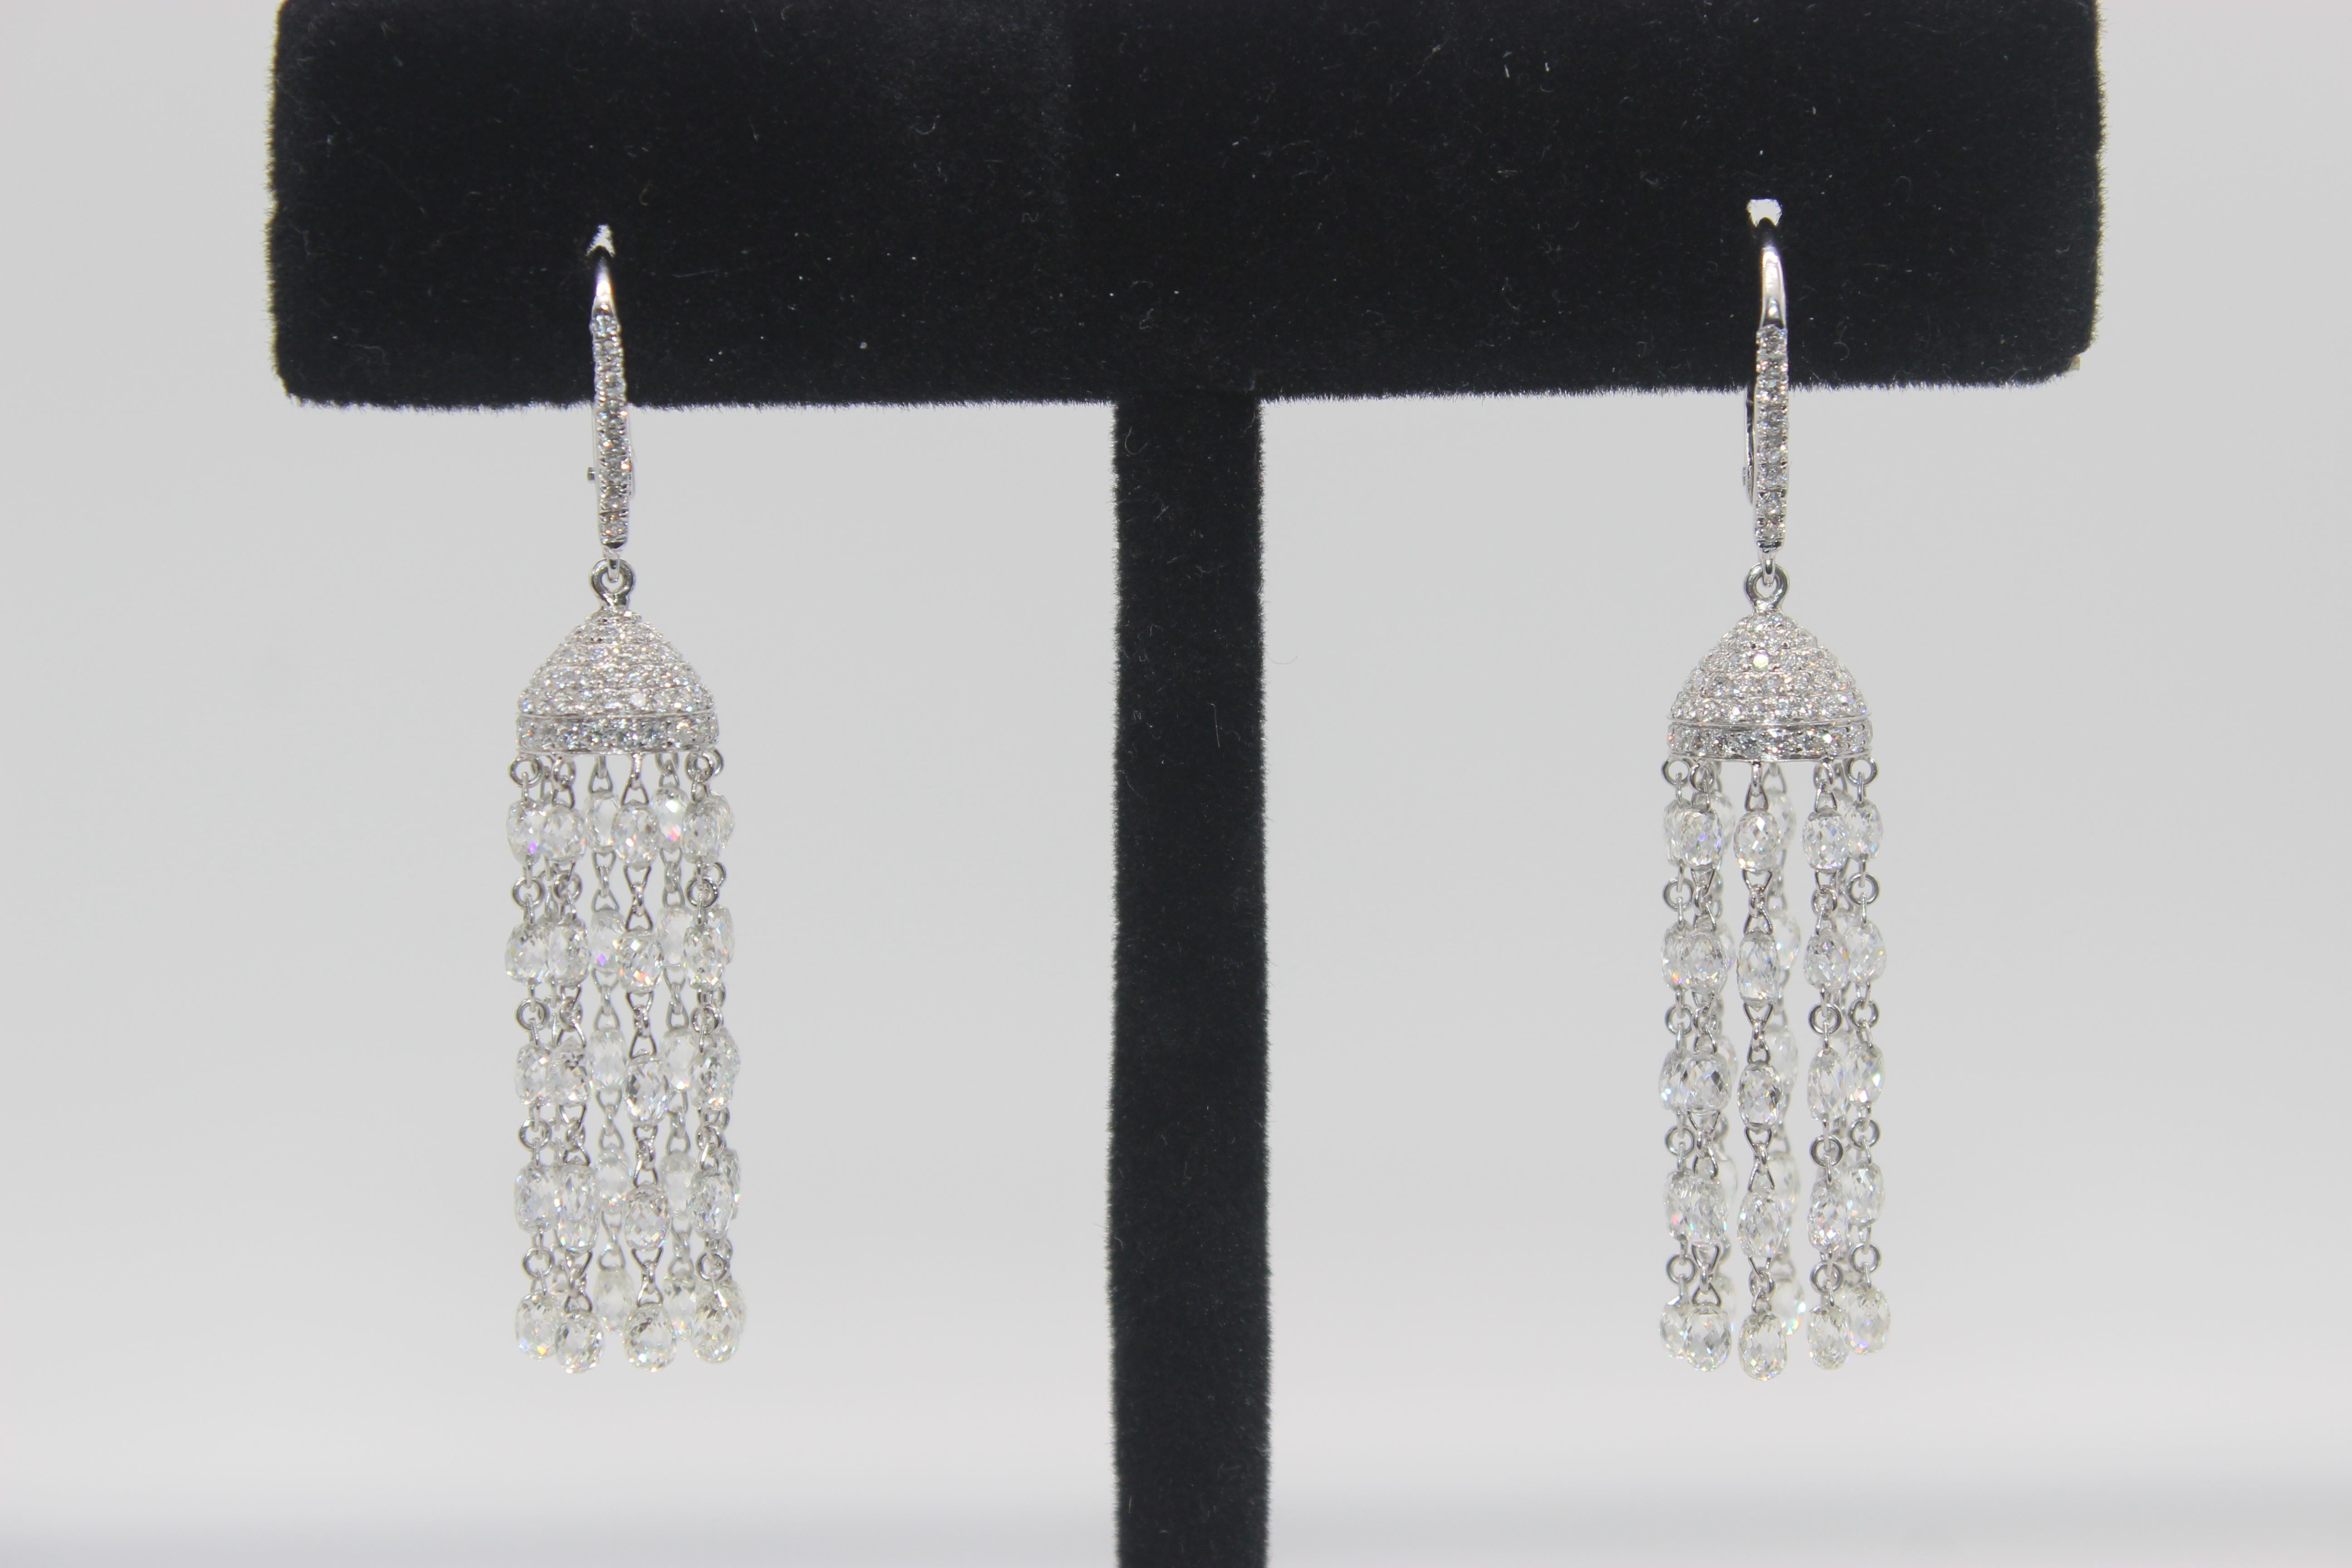 PANIM Diamond Briolette 18K White Gold Tassel Earrings

Panim Diamond Briolette Tassel Earrings are a gorgeous and unique pair of earrings that are sure to make a statement. The earrings feature sparkling diamond briolettes, which are pear-shaped